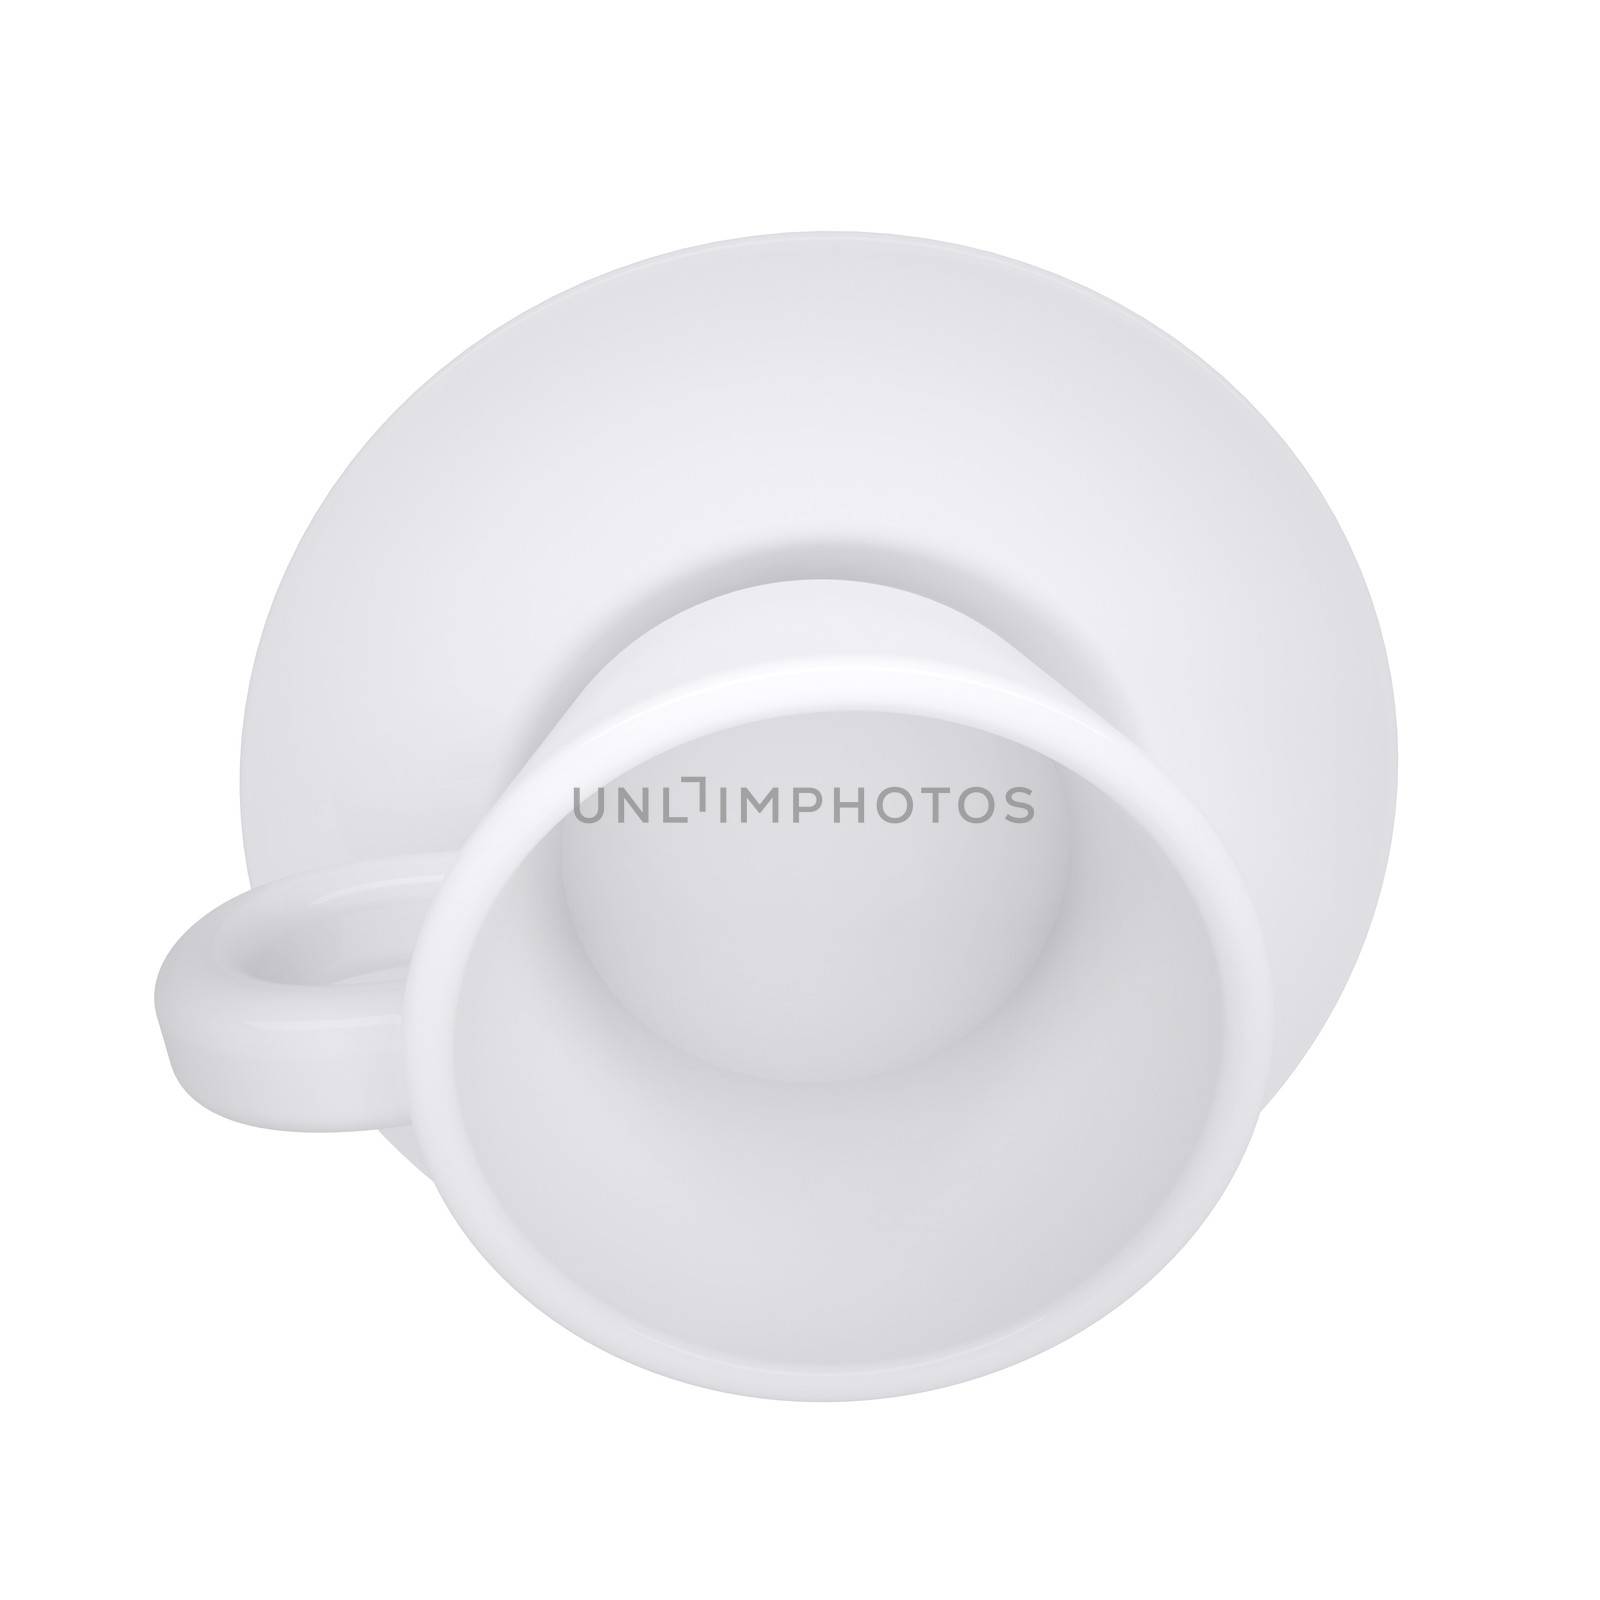 White coffee cup and saucer by cherezoff